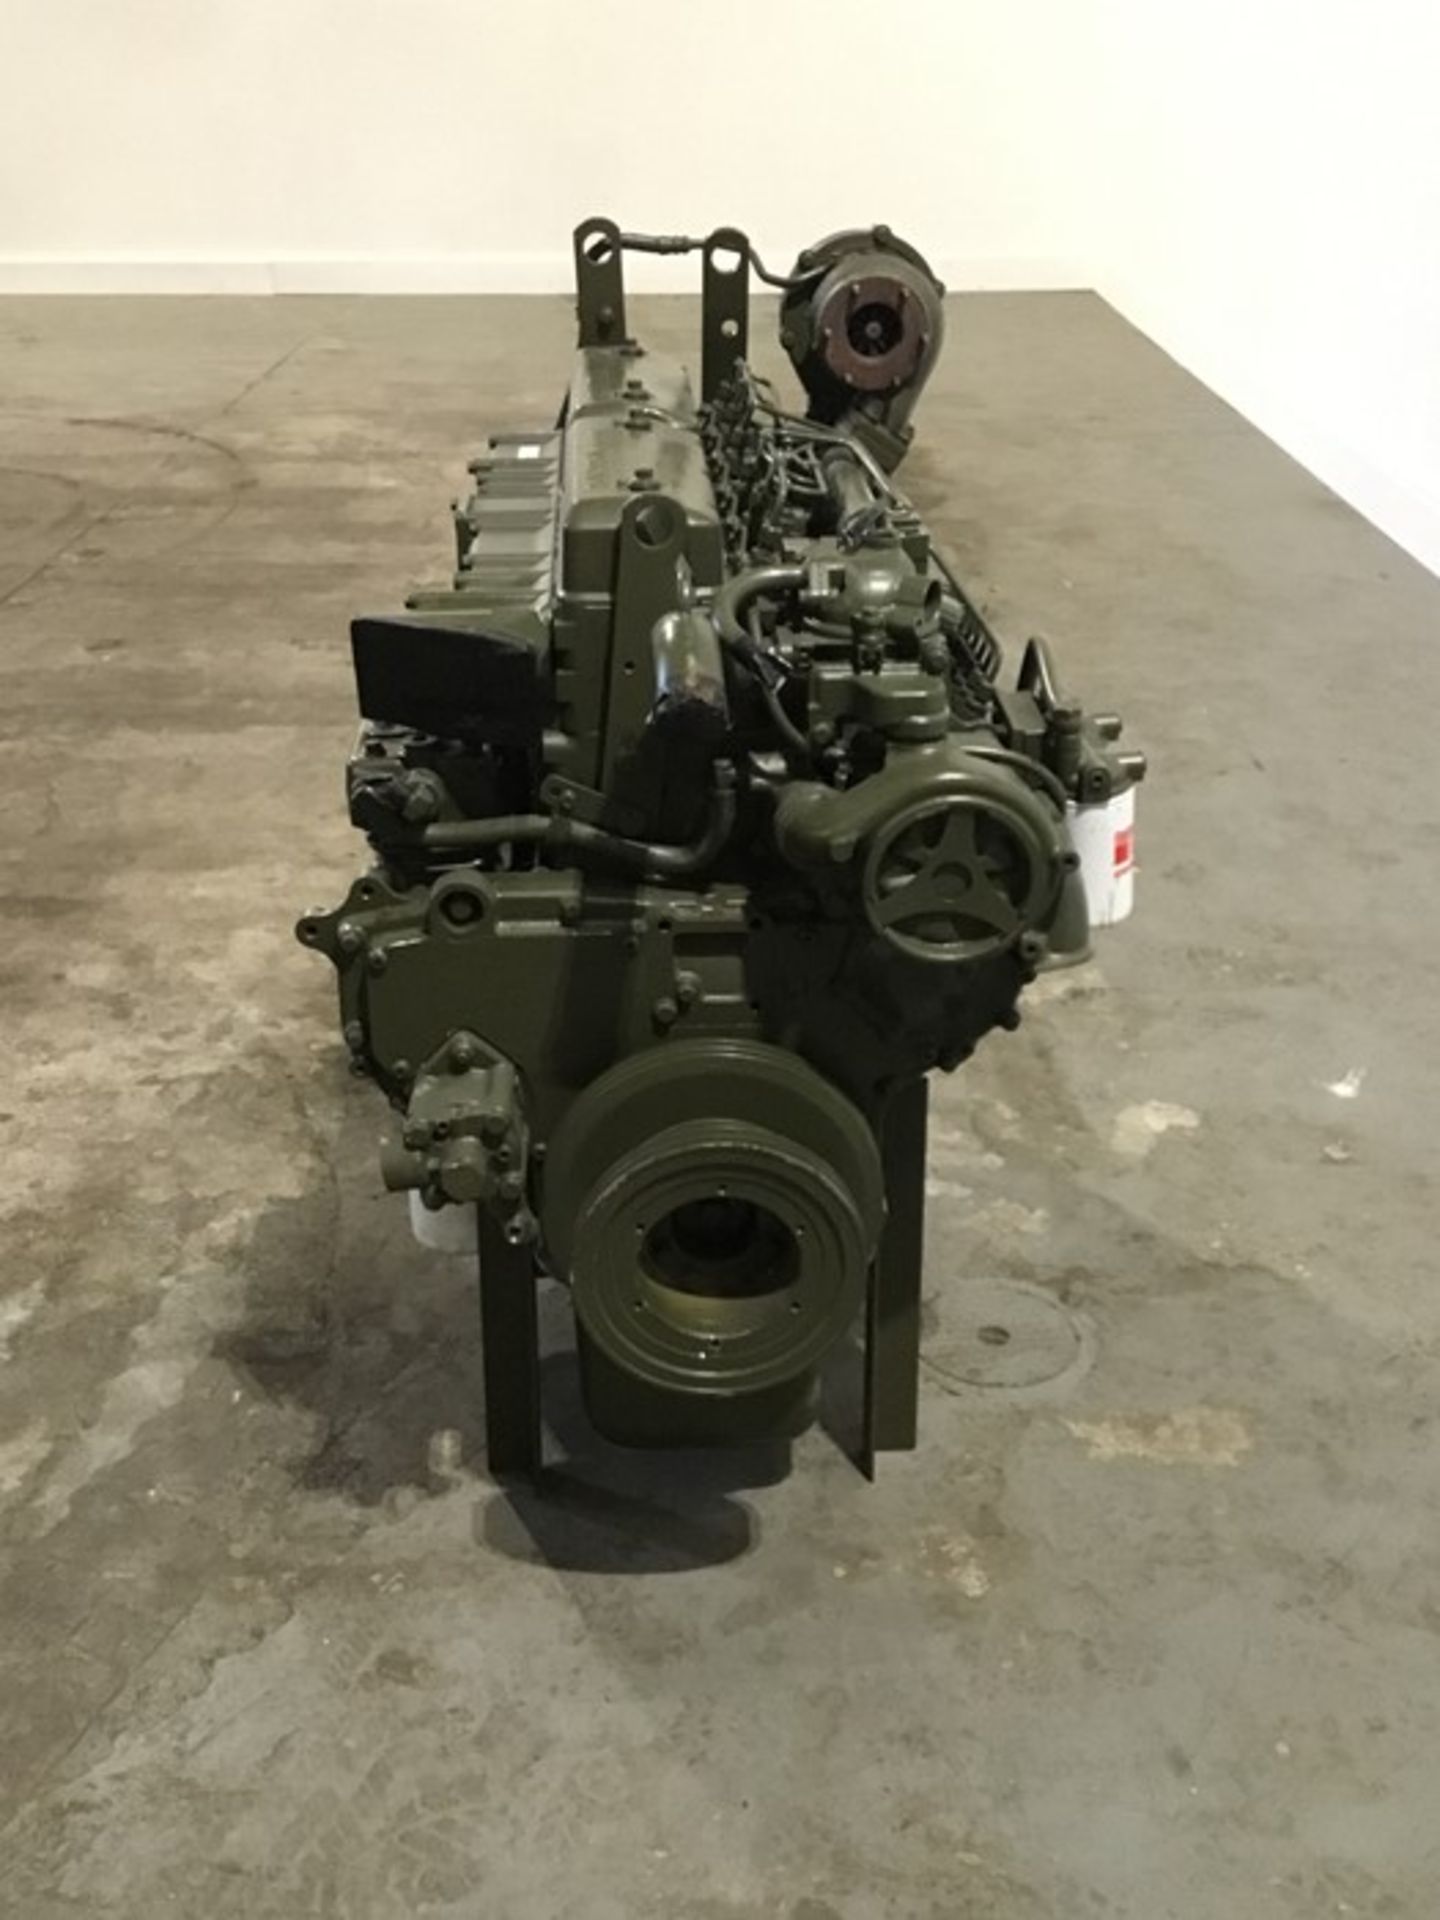 Volvo D6 Diesel Engine: Volvo D6 6Cyl Turbo low hours - Image 15 of 18